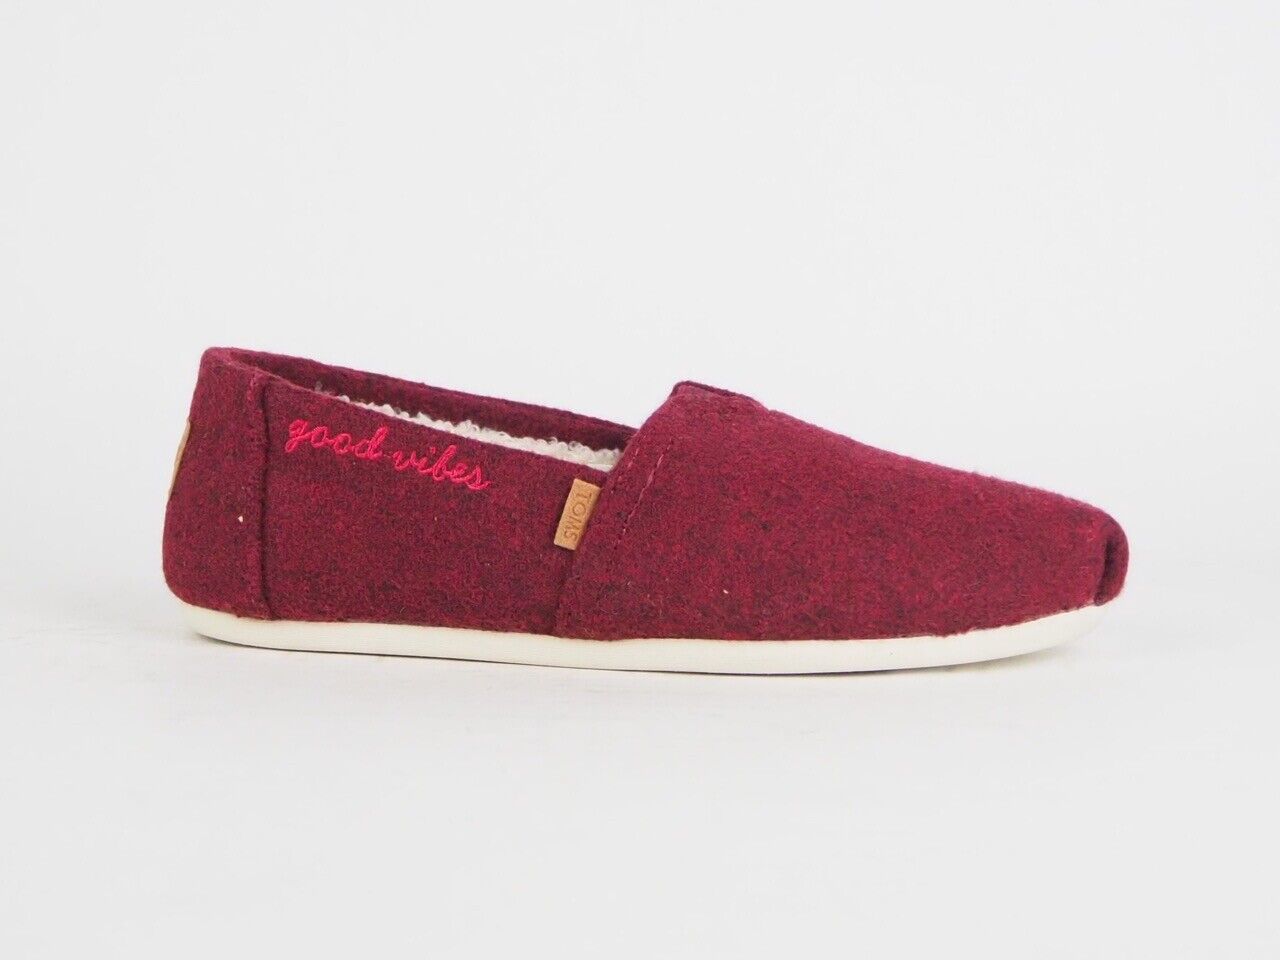 Womens Toms Classic Burgundy Faux Shearling Flats Slip On Ladies Trainers Uk 3.5 - London Top Style